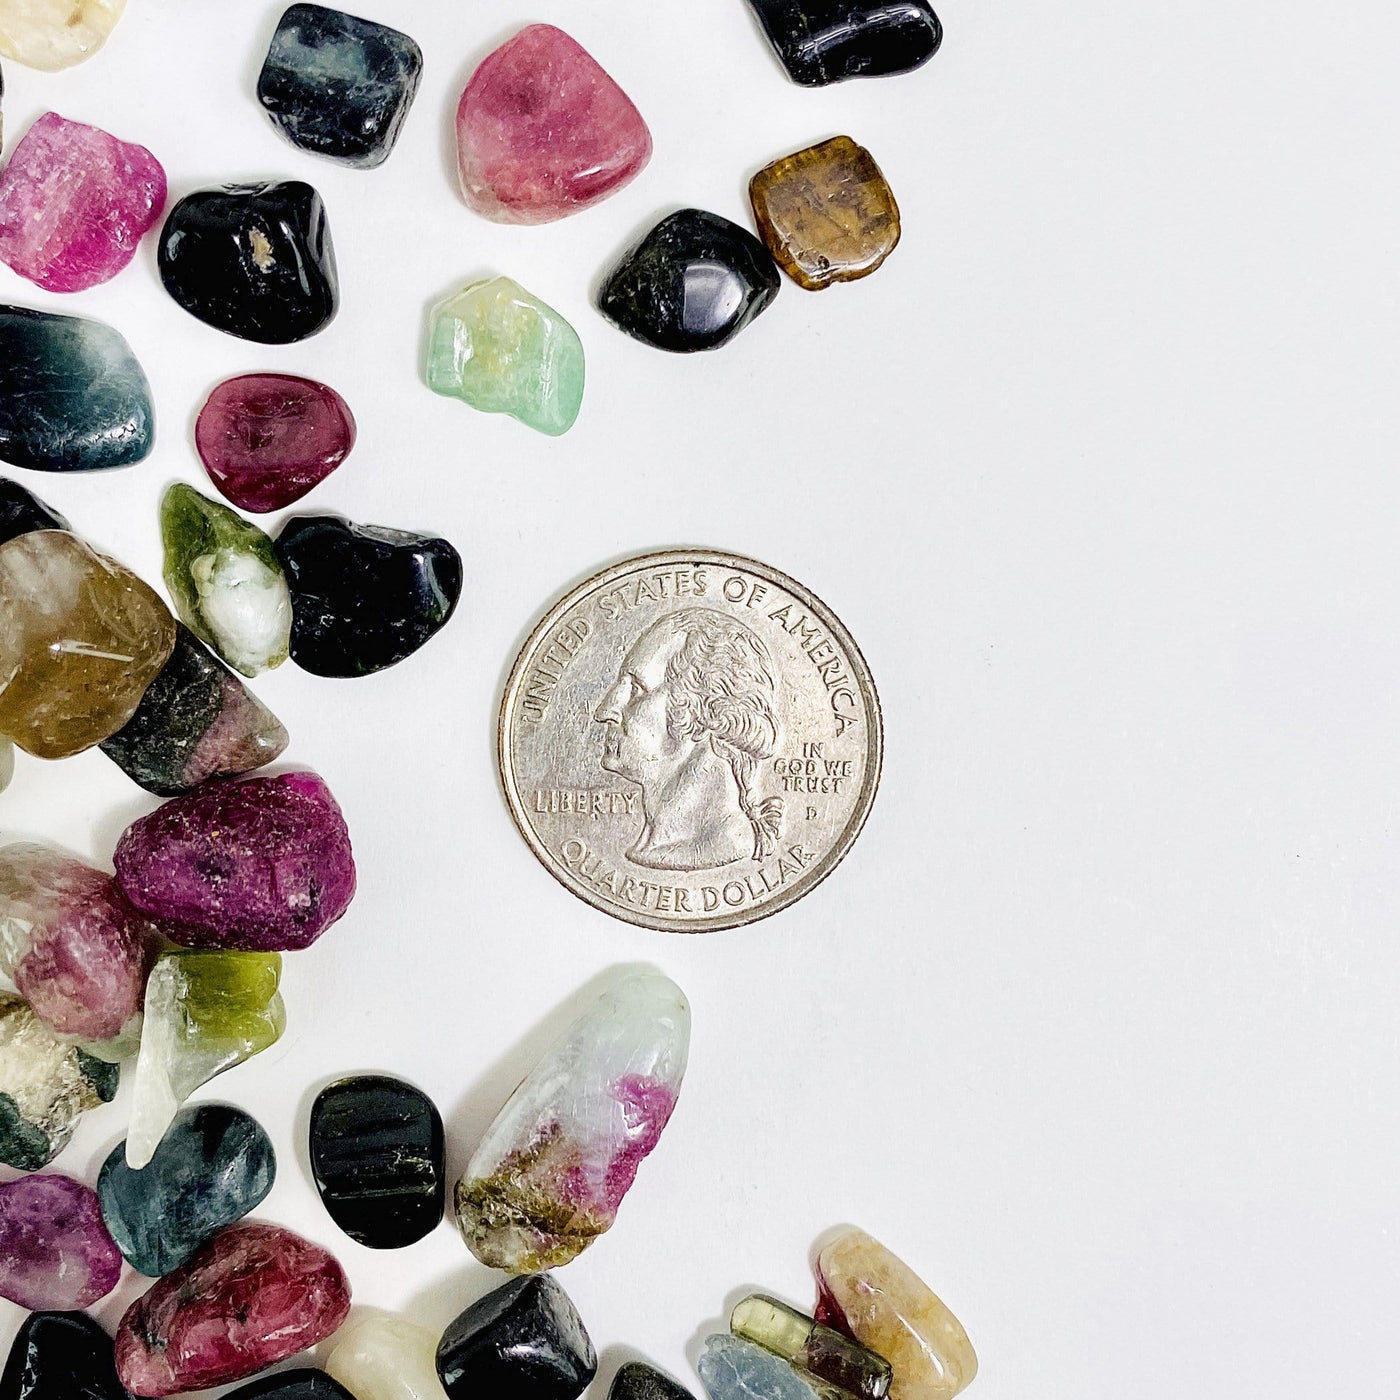 Watermelon Tourmaline Chips next to a quarter for size reference 